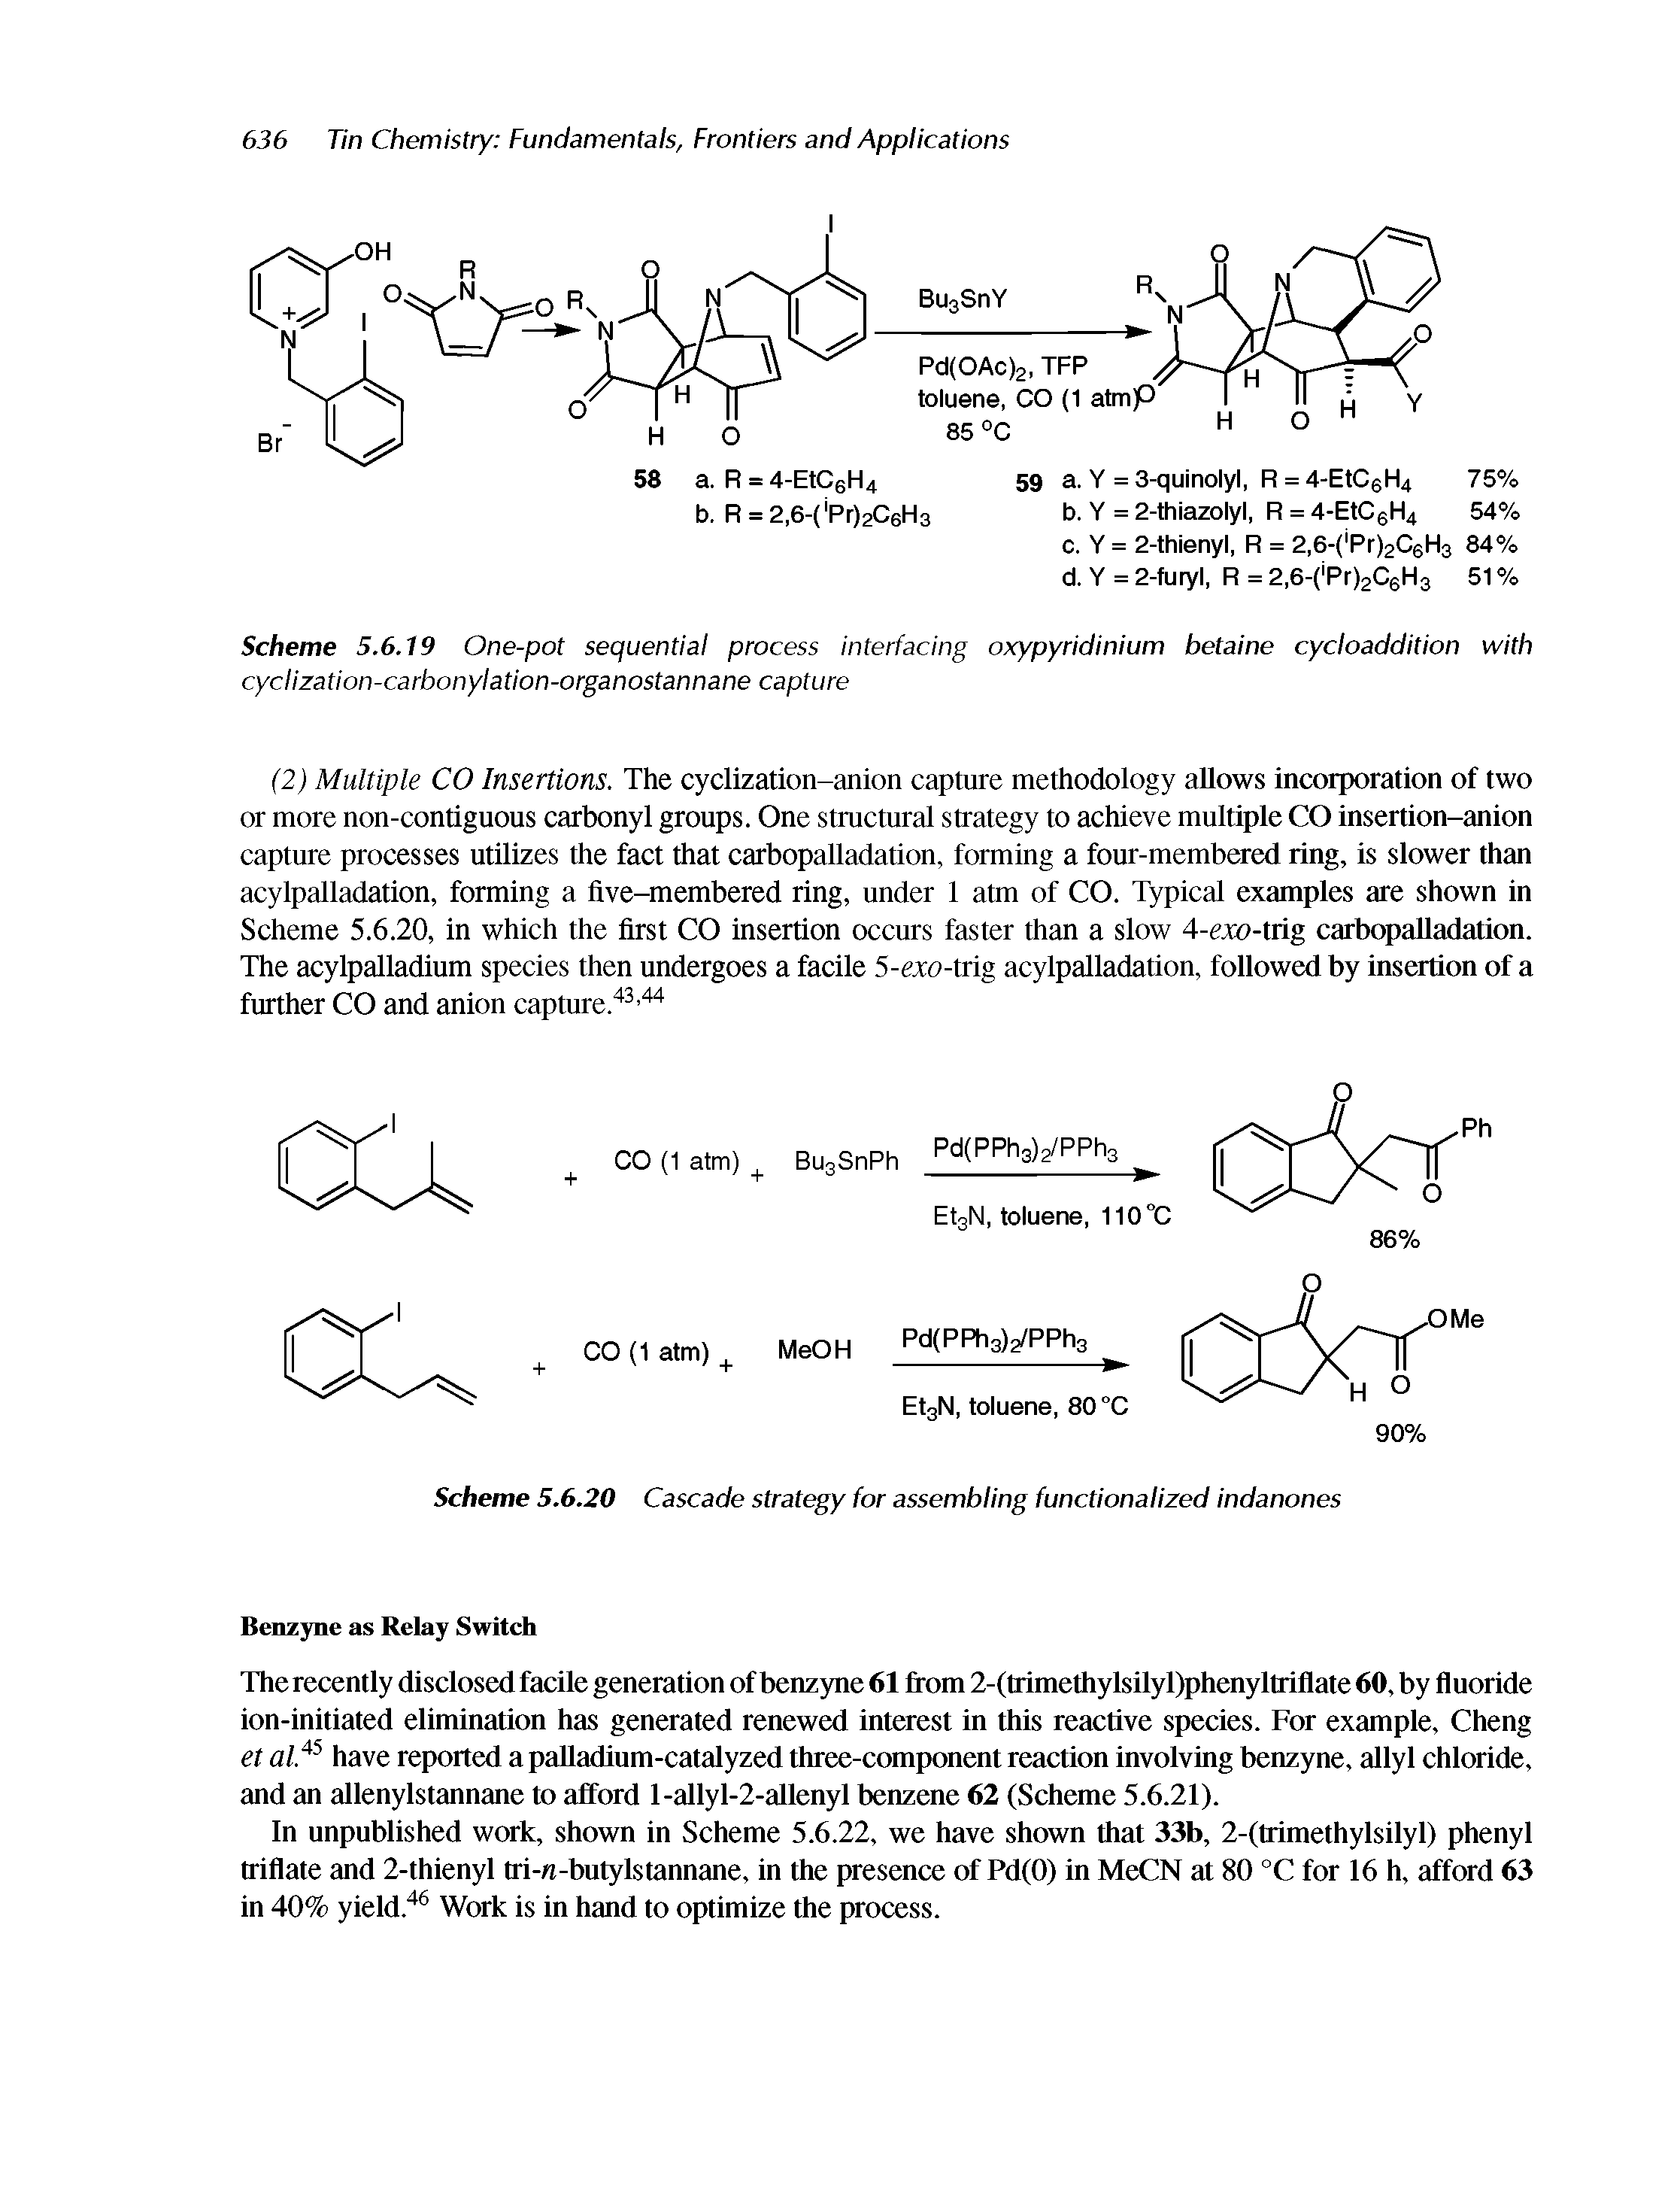 Scheme 5.6.19 One-pot sequential process interfacing oxypyridinium betaine cycloaddition with cyclization-carbonylation-organostannane capture...